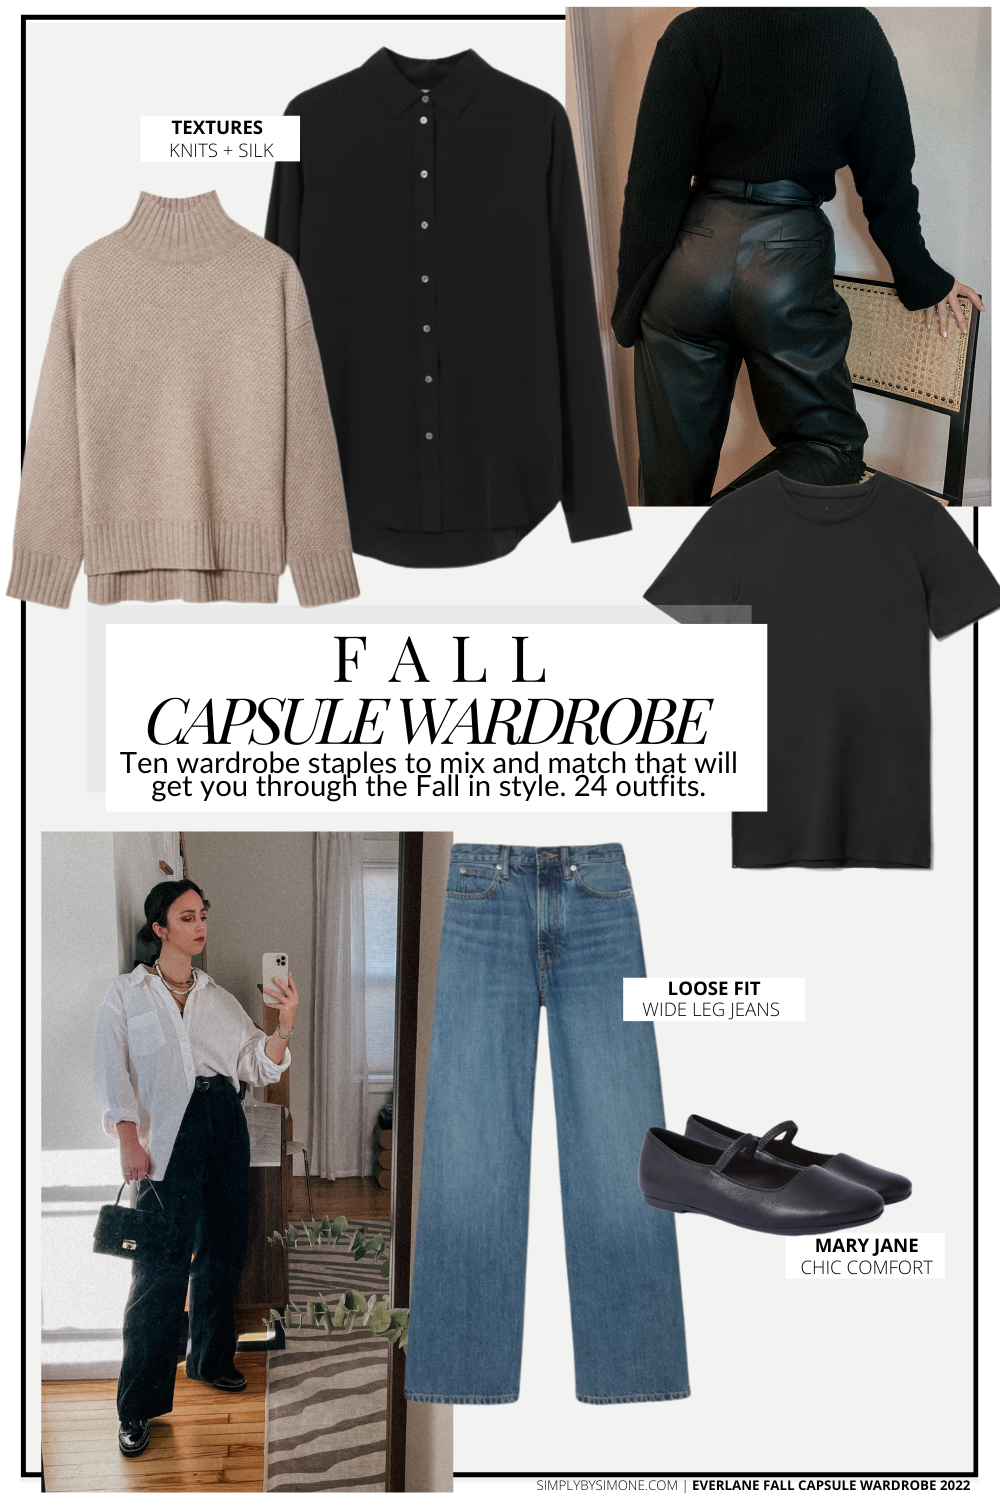 Everlane Fall Capsule Wardrobe – 10 Pieces, 24 Outfits